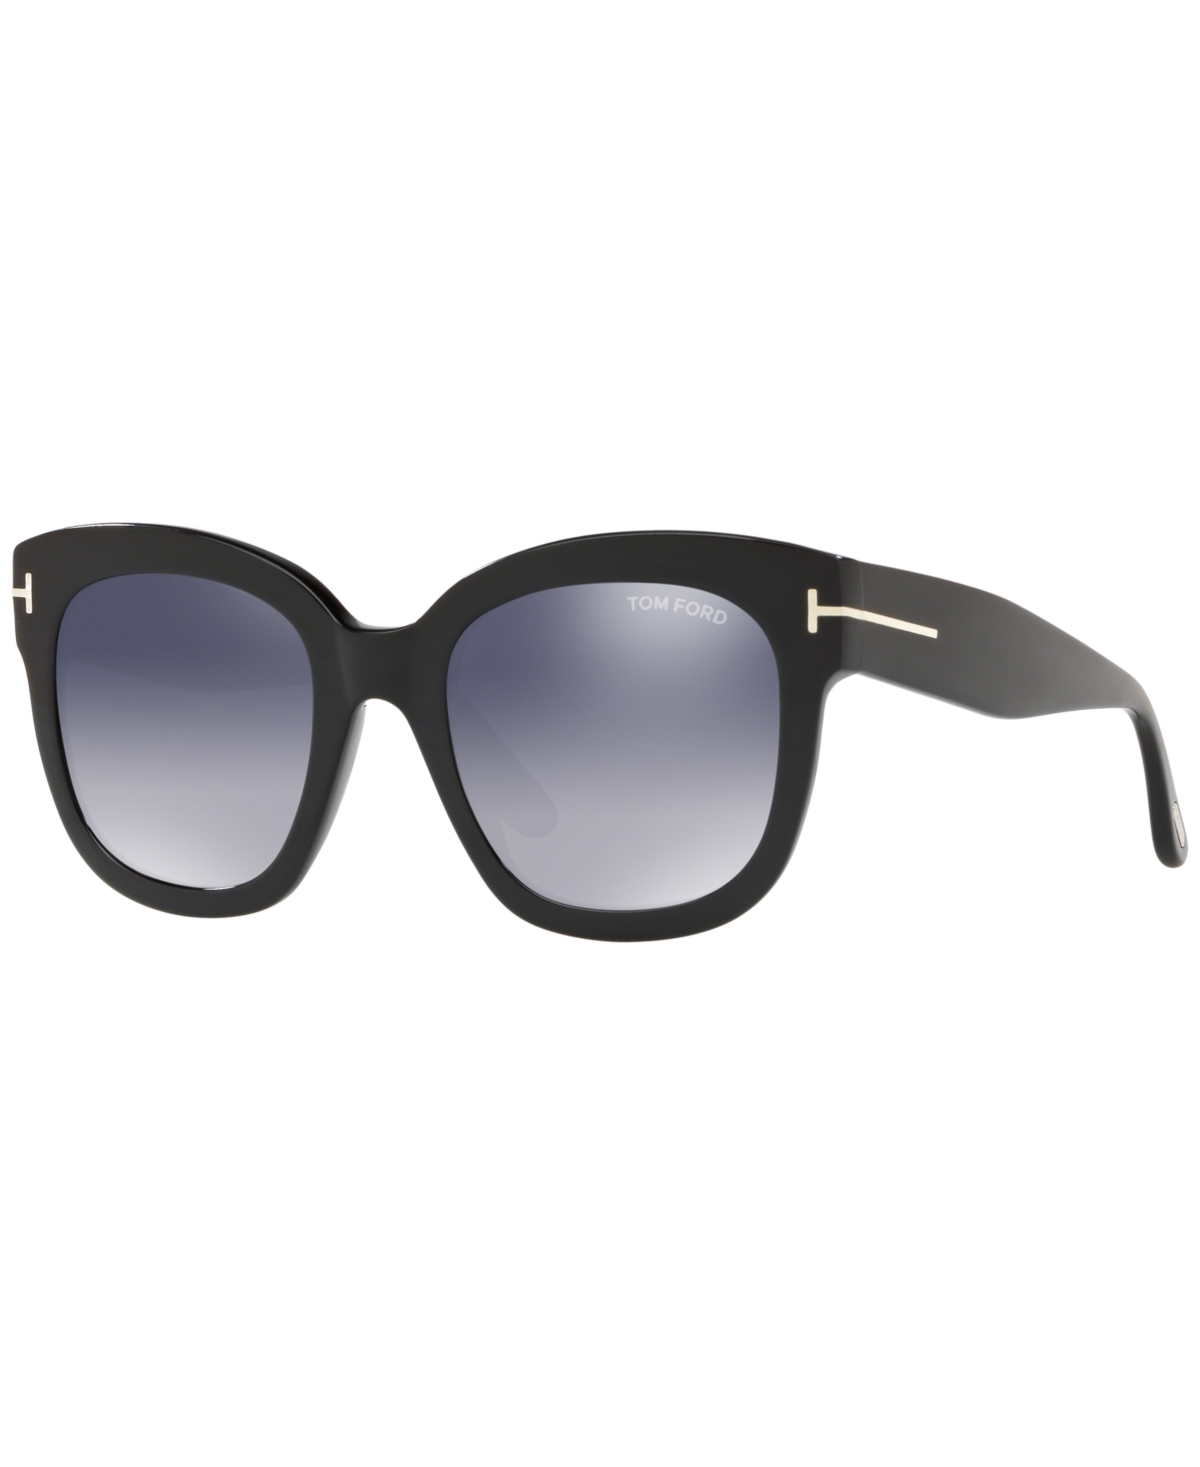 Tom Ford Sunglasses, Ft0613 52 In Black,grey Mirror